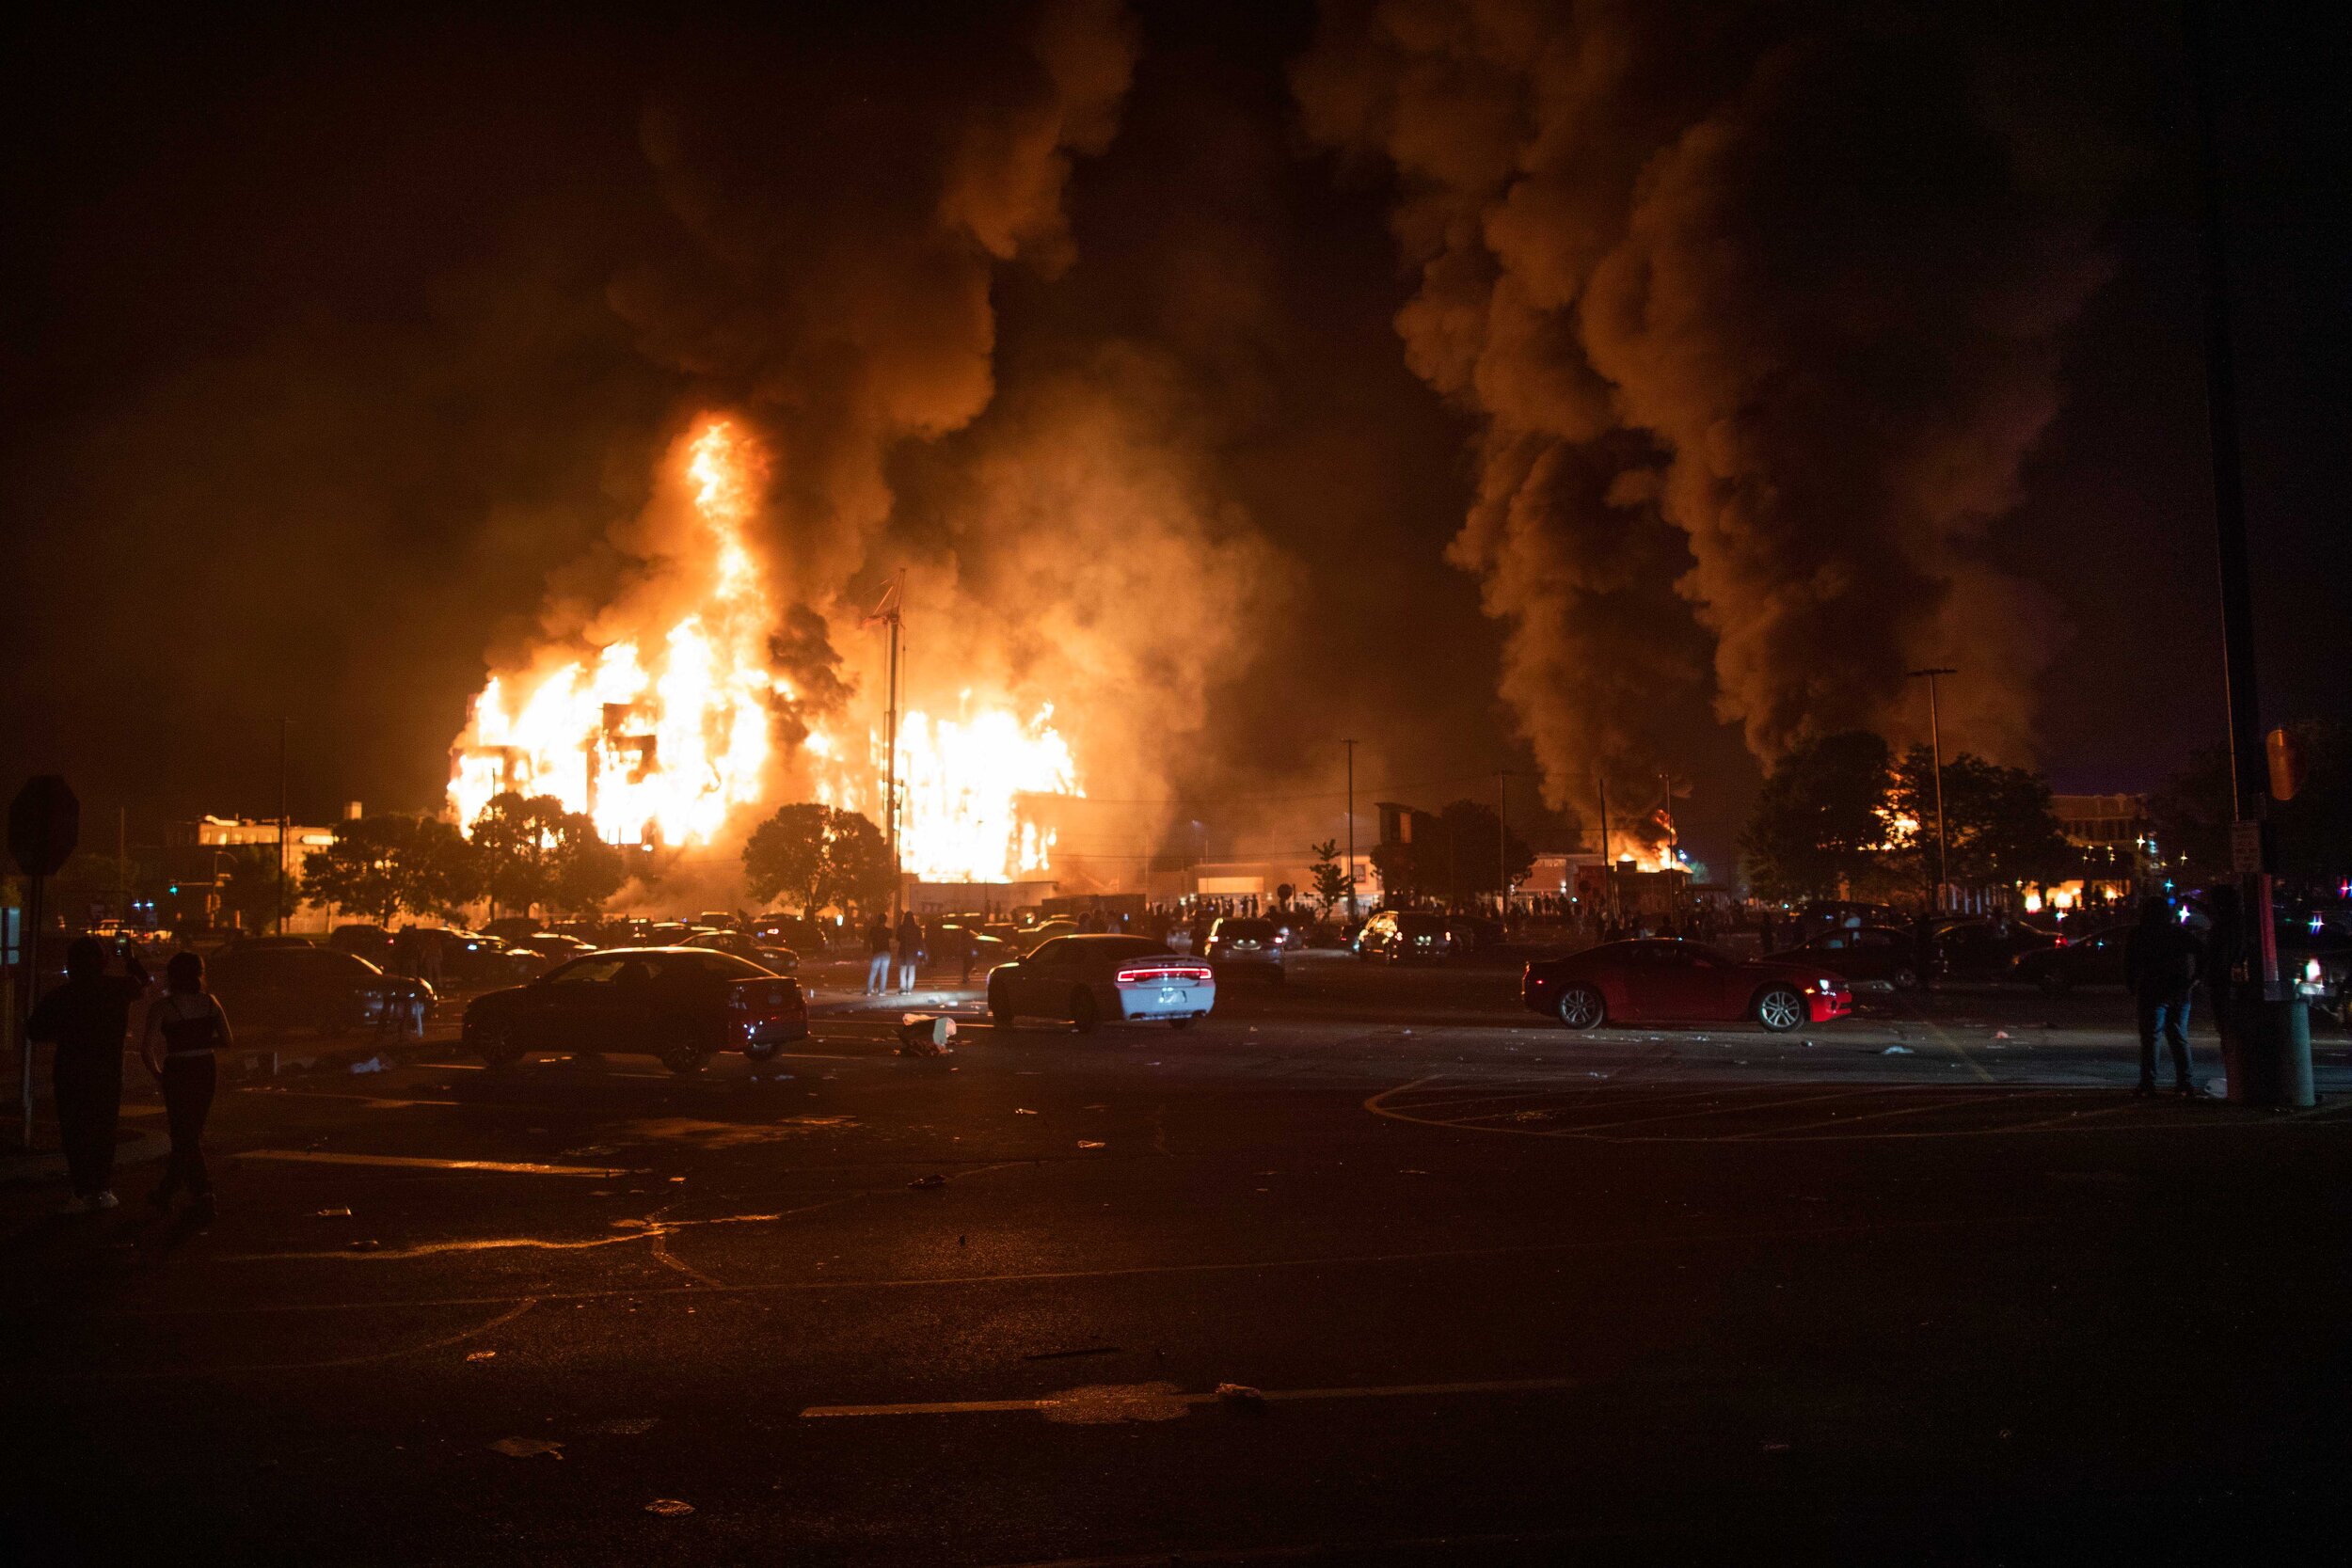  A 190 unit affordable housing complex that was under construction burns after it was set on fire during a riot over the police killing of George Floyd in Minneapolis, Minnesota on May 28. 